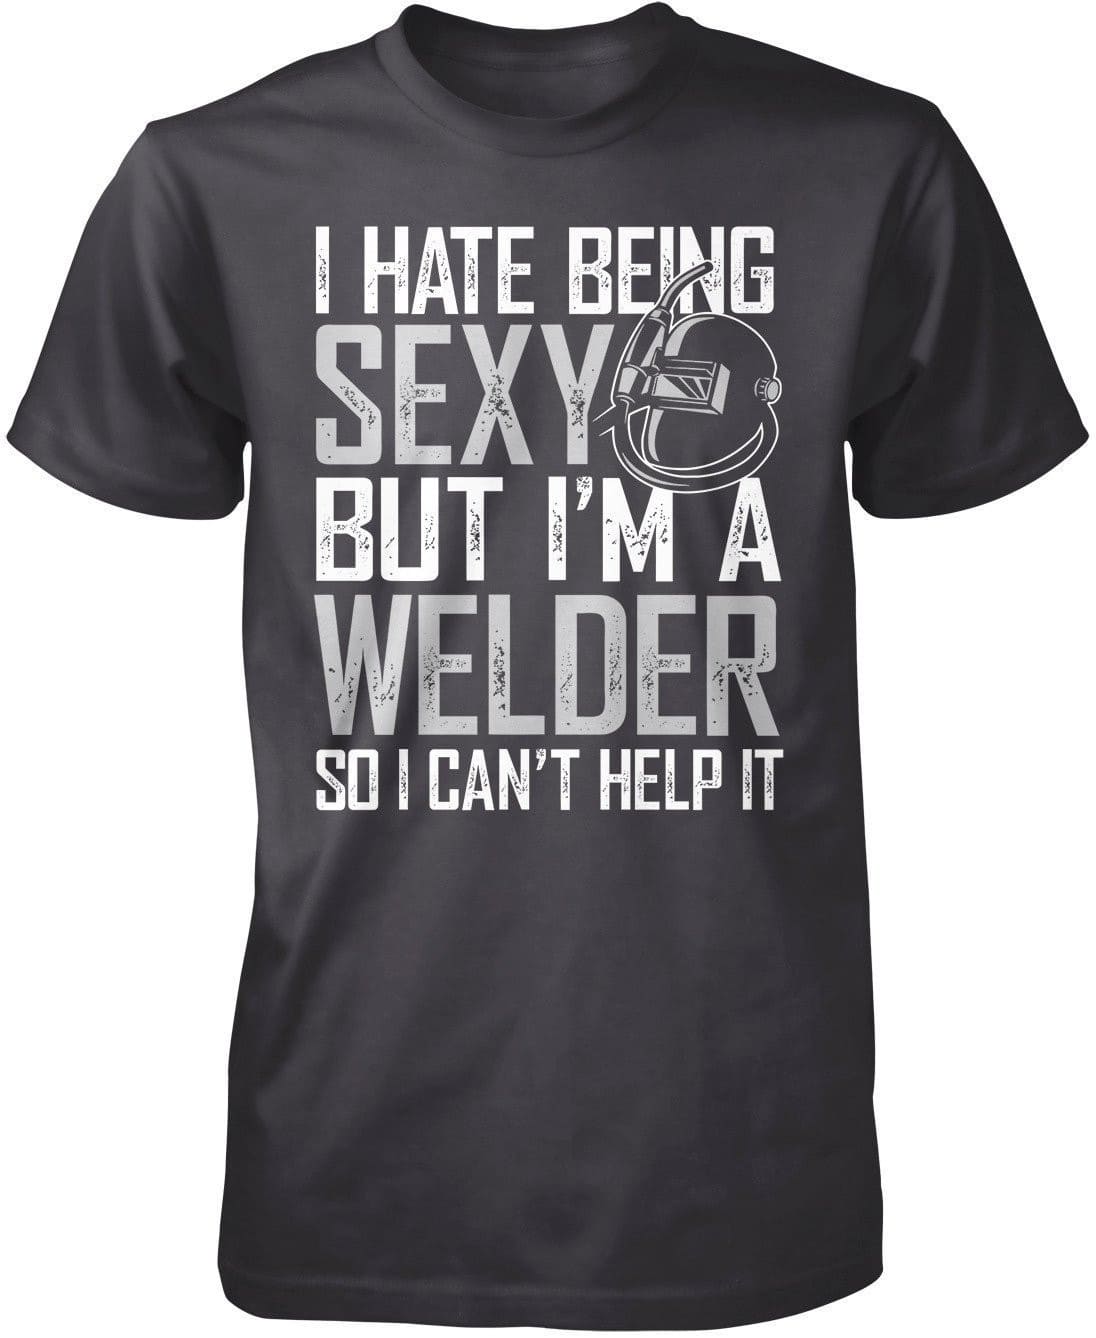 I Hate Being Sexy But I'm a Welder T-Shirt